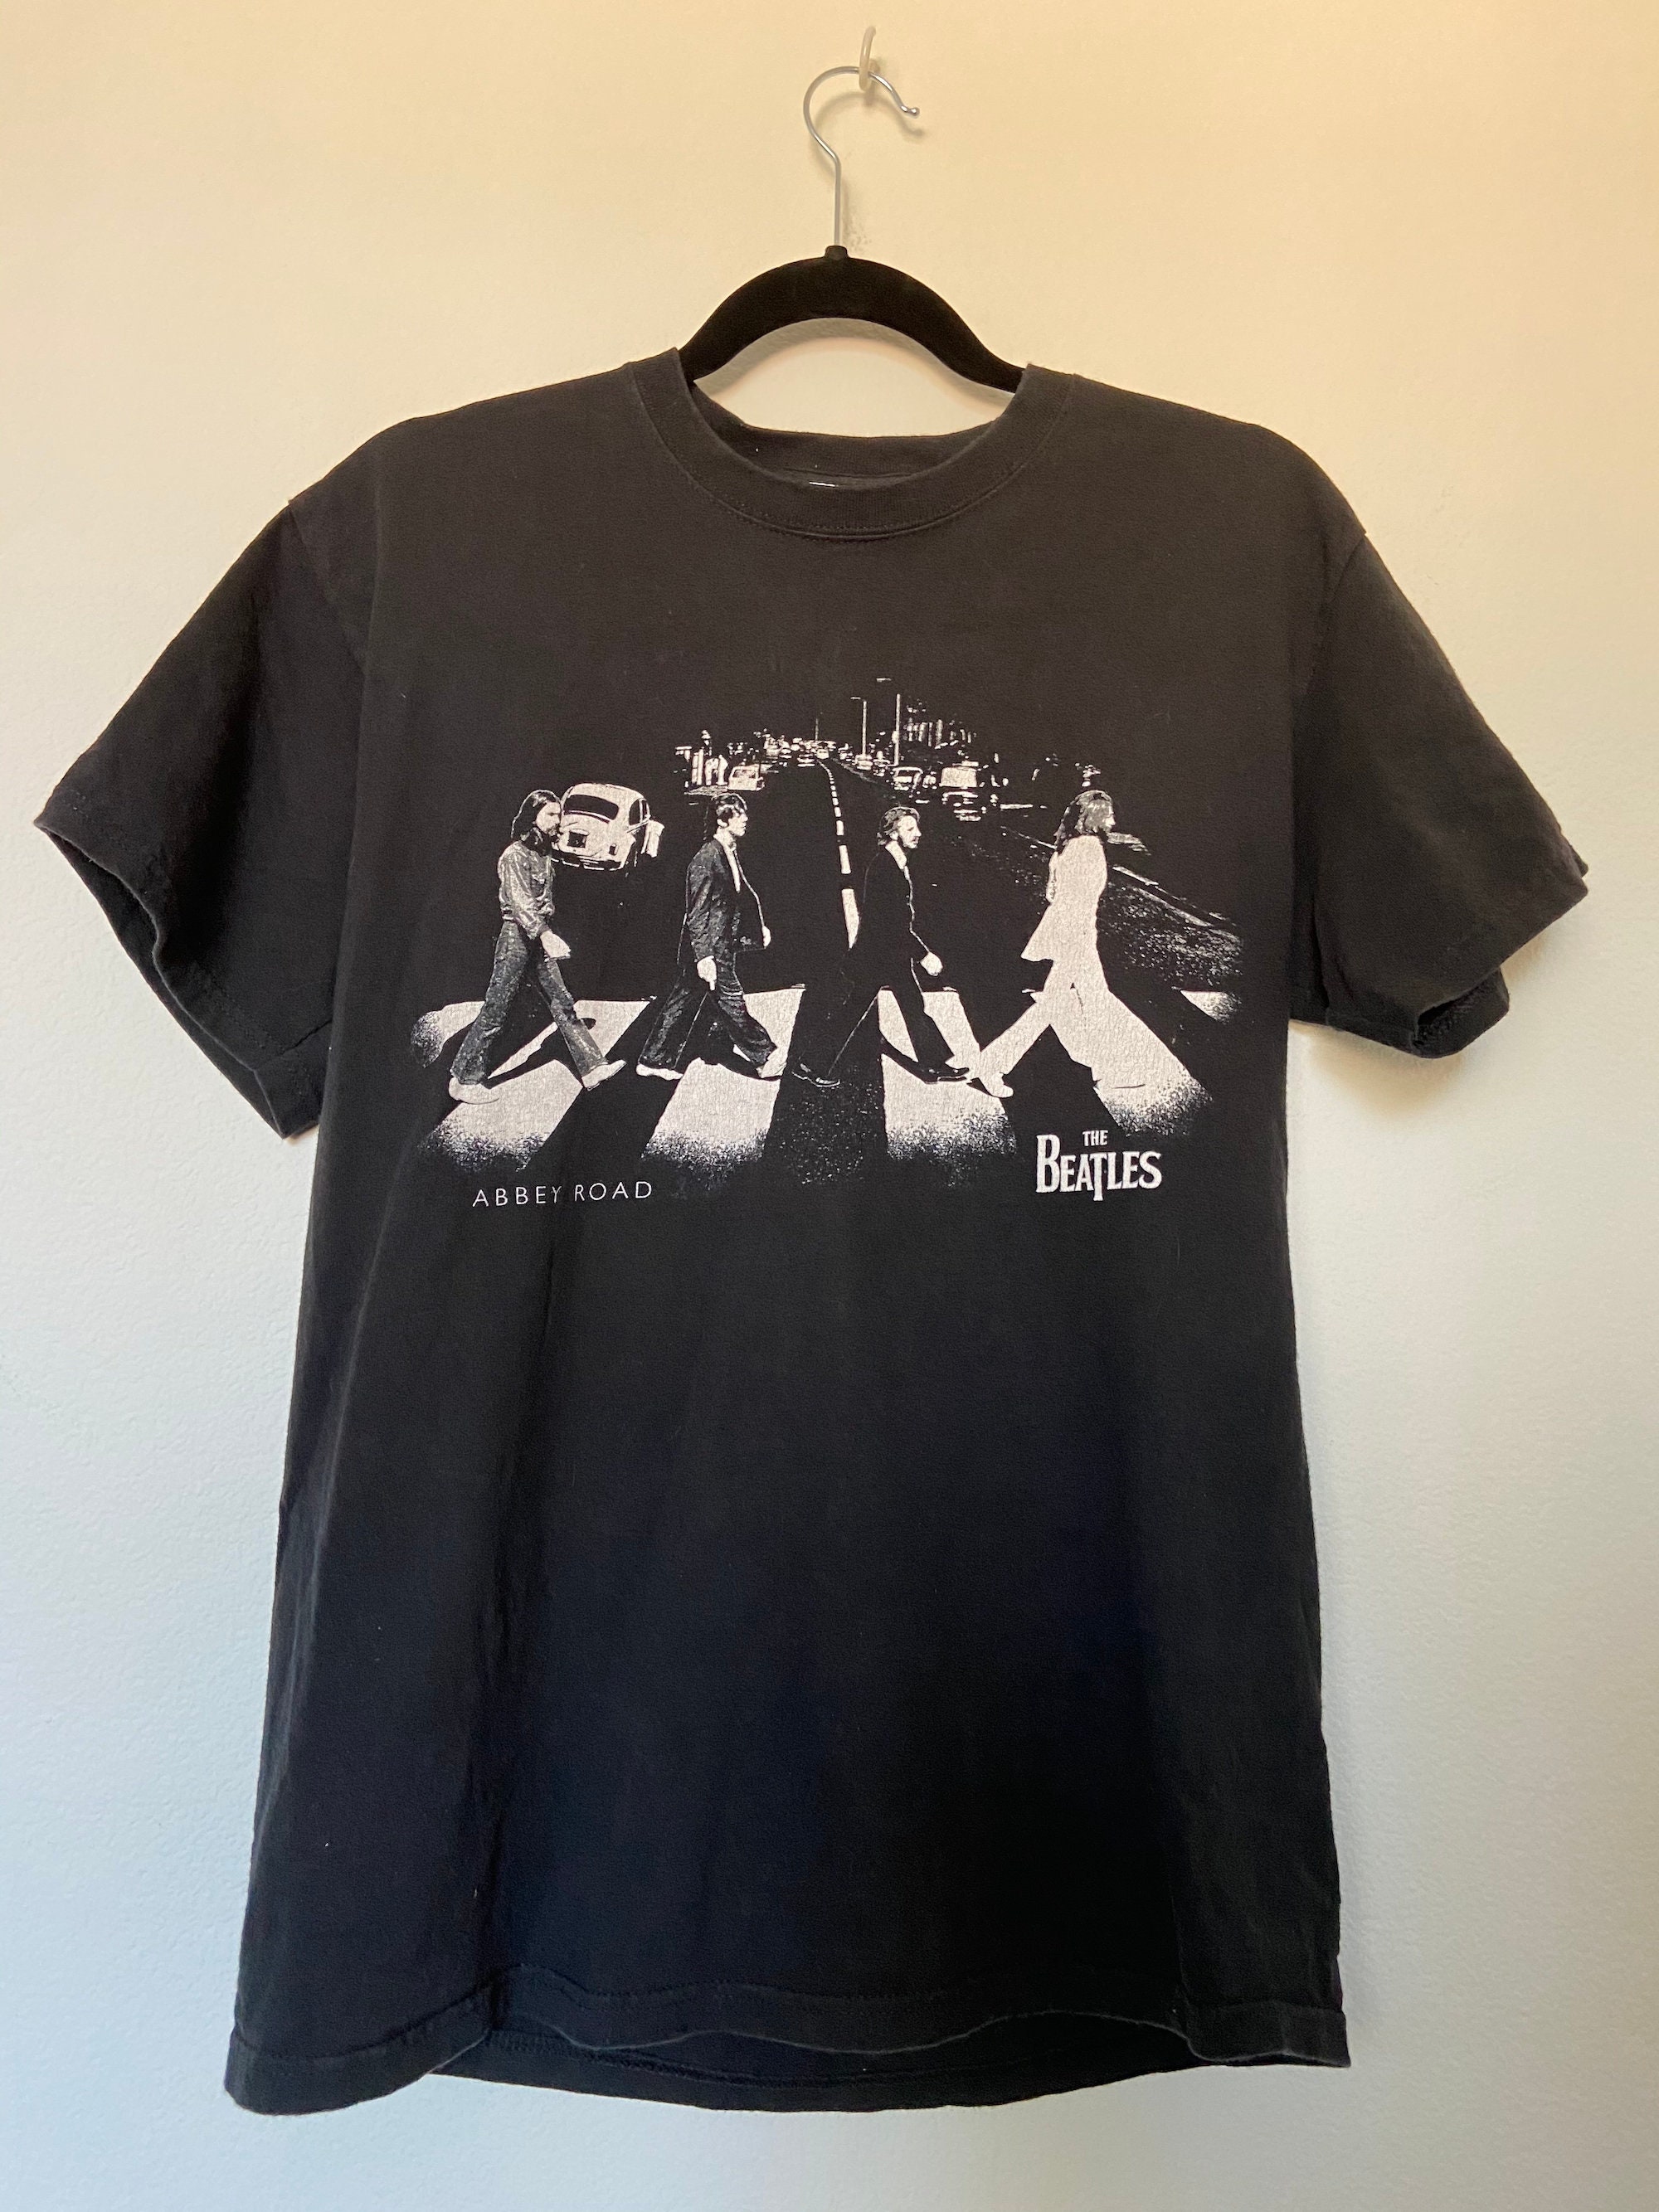 The Beatles Abbey Road Official Graphic T-Shirt | Etsy